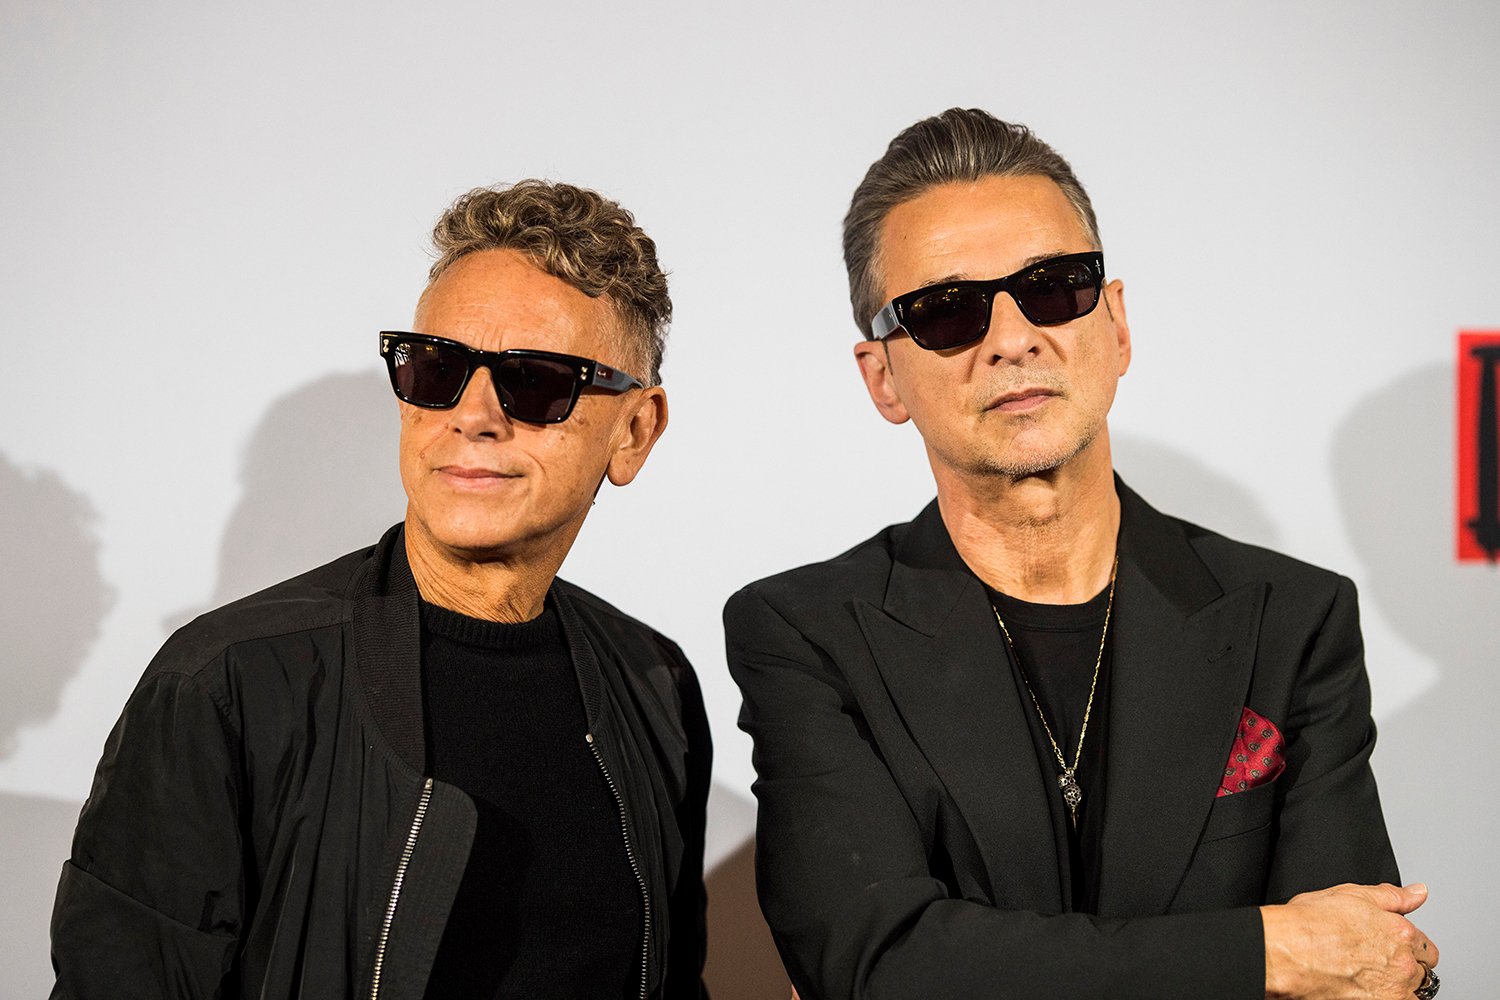 Depeche Mode’s ‘Never Let Me Down Again’ Received a Streaming Boost Thanks to ‘The Last of Us’